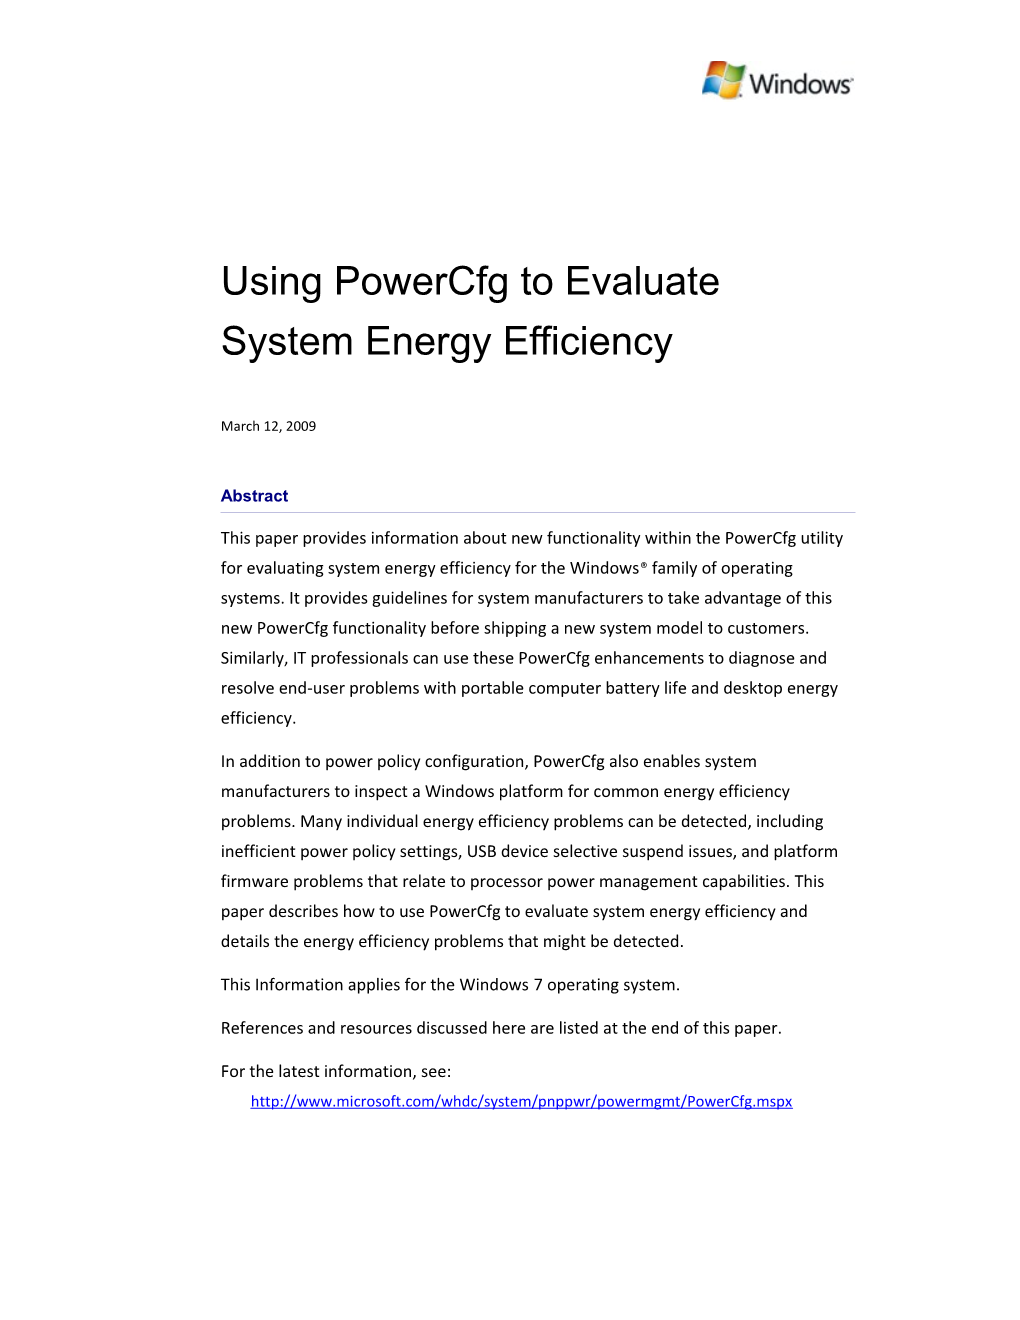 Using Powercfg to Evaluate System Energy Efficiency